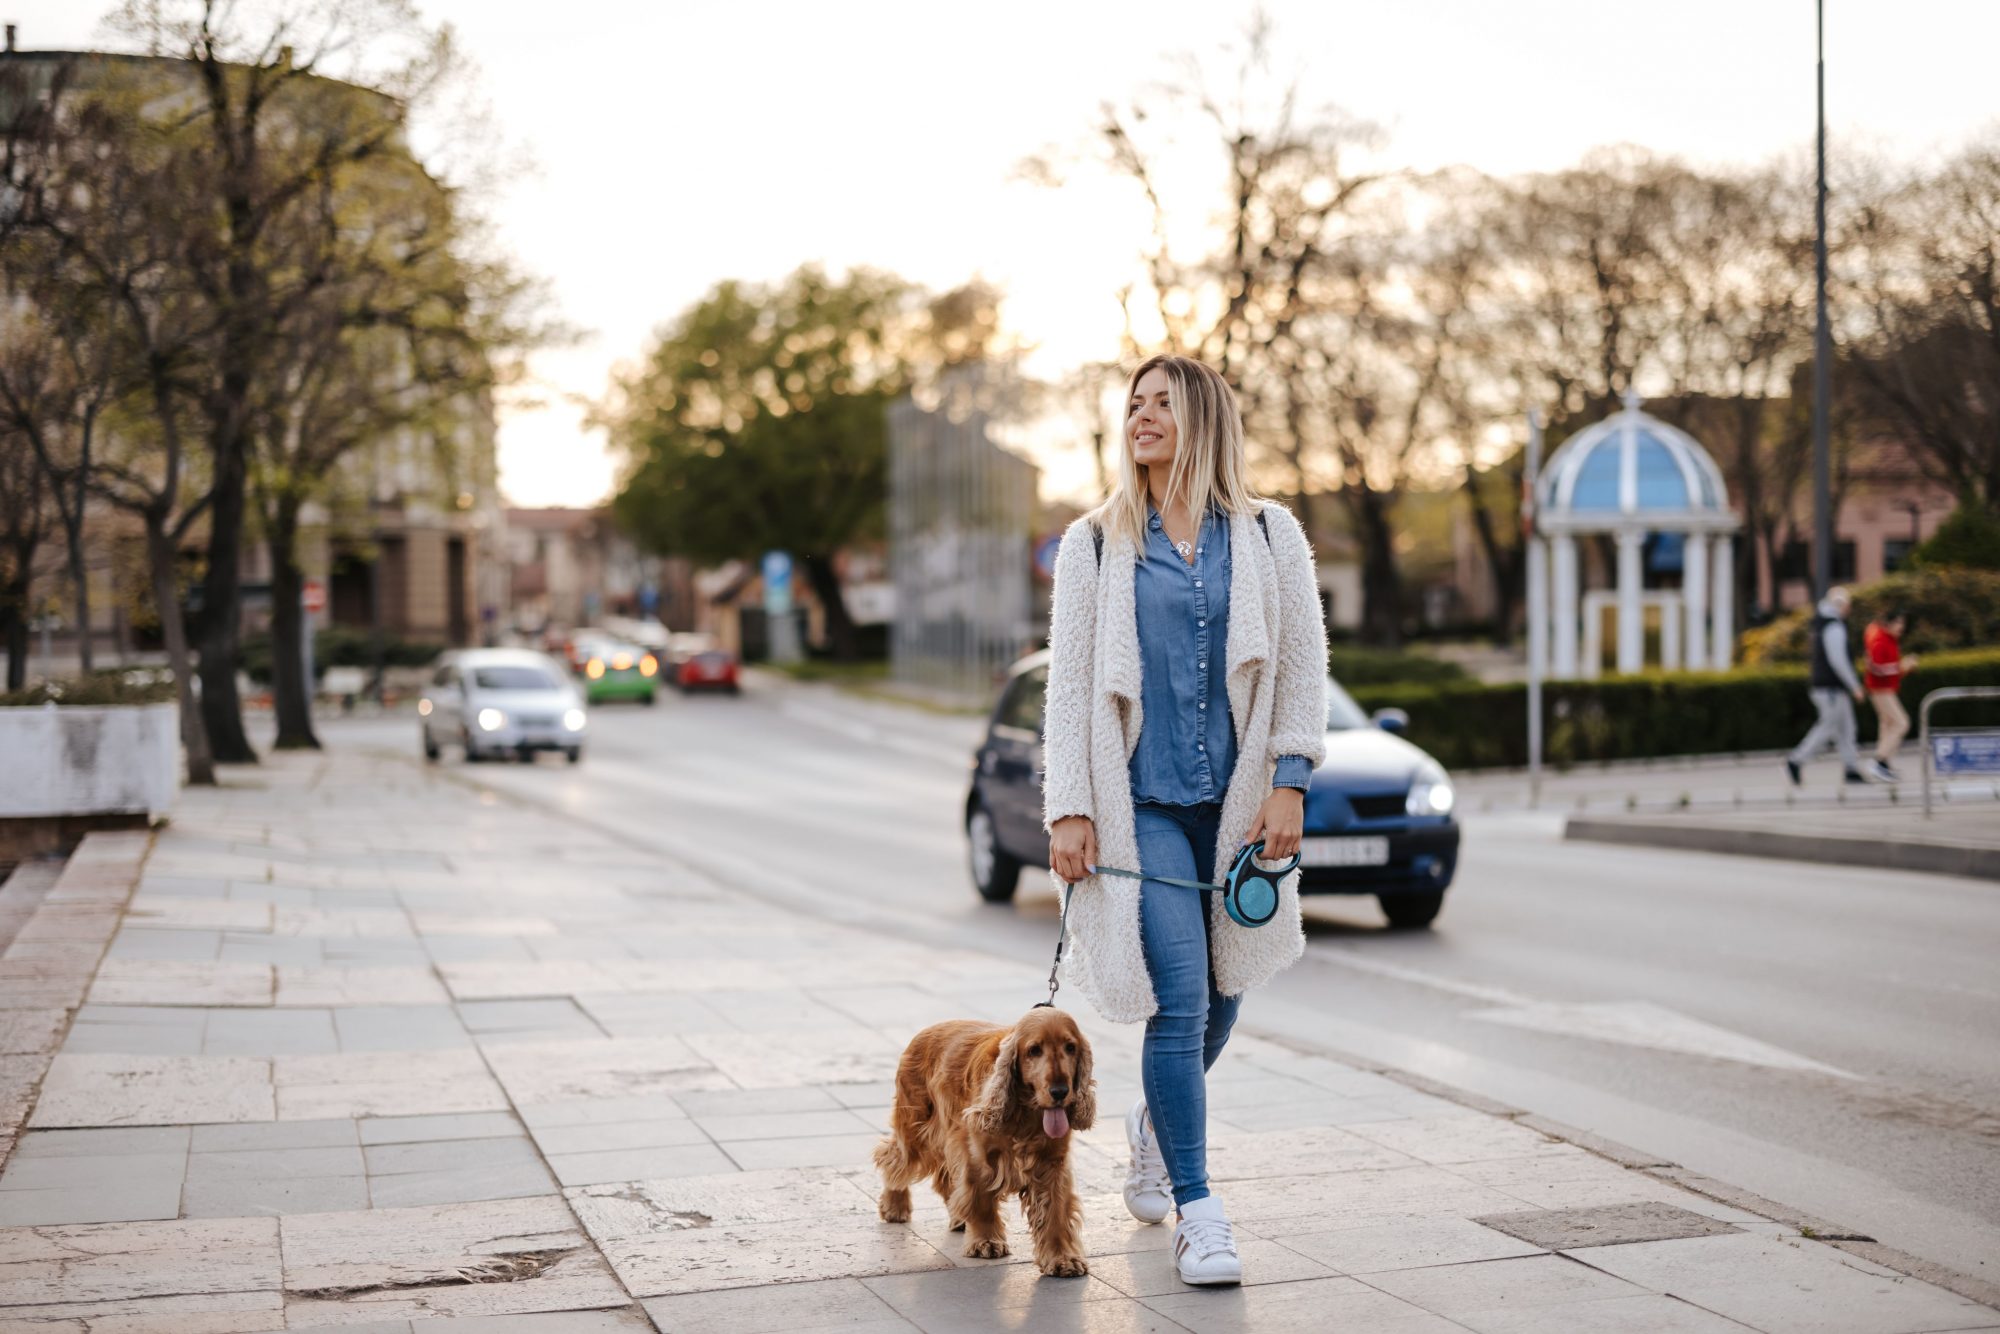 Woman in the city walking her dog.